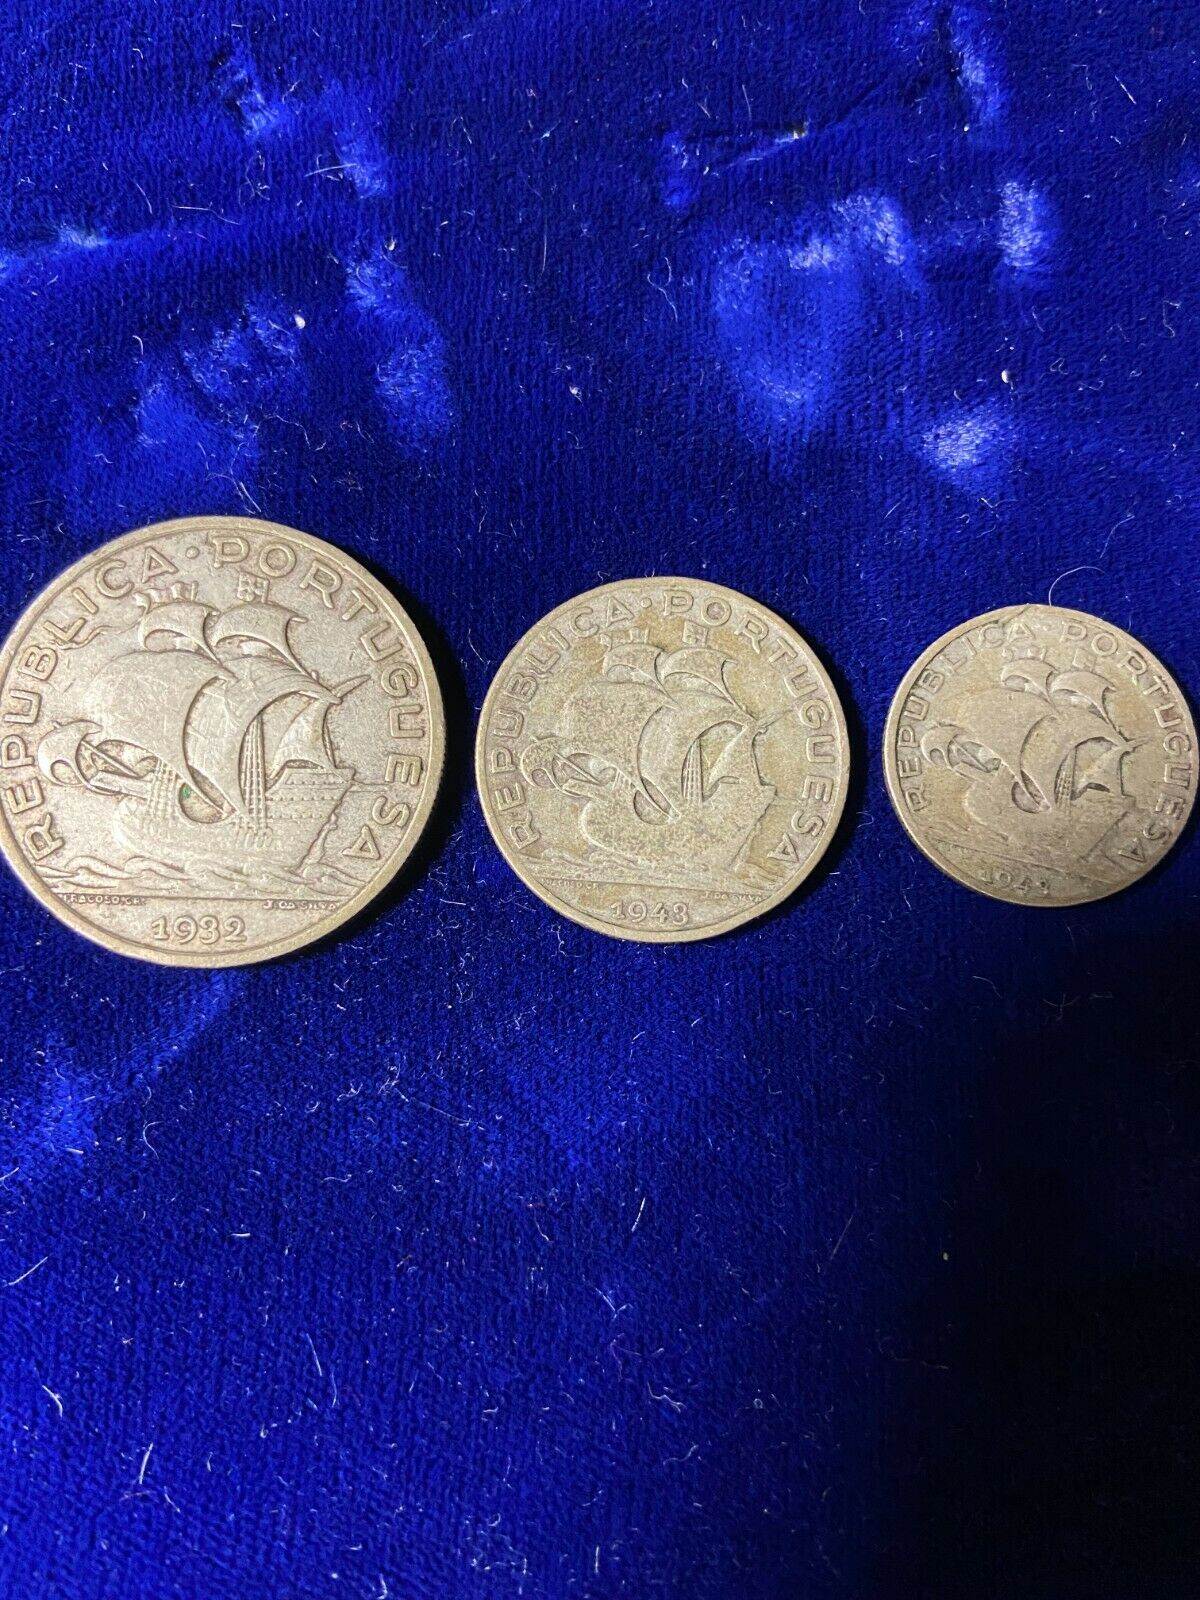 3 Silver Coins From Portugal, 2.5, 5, & 10 Escudos